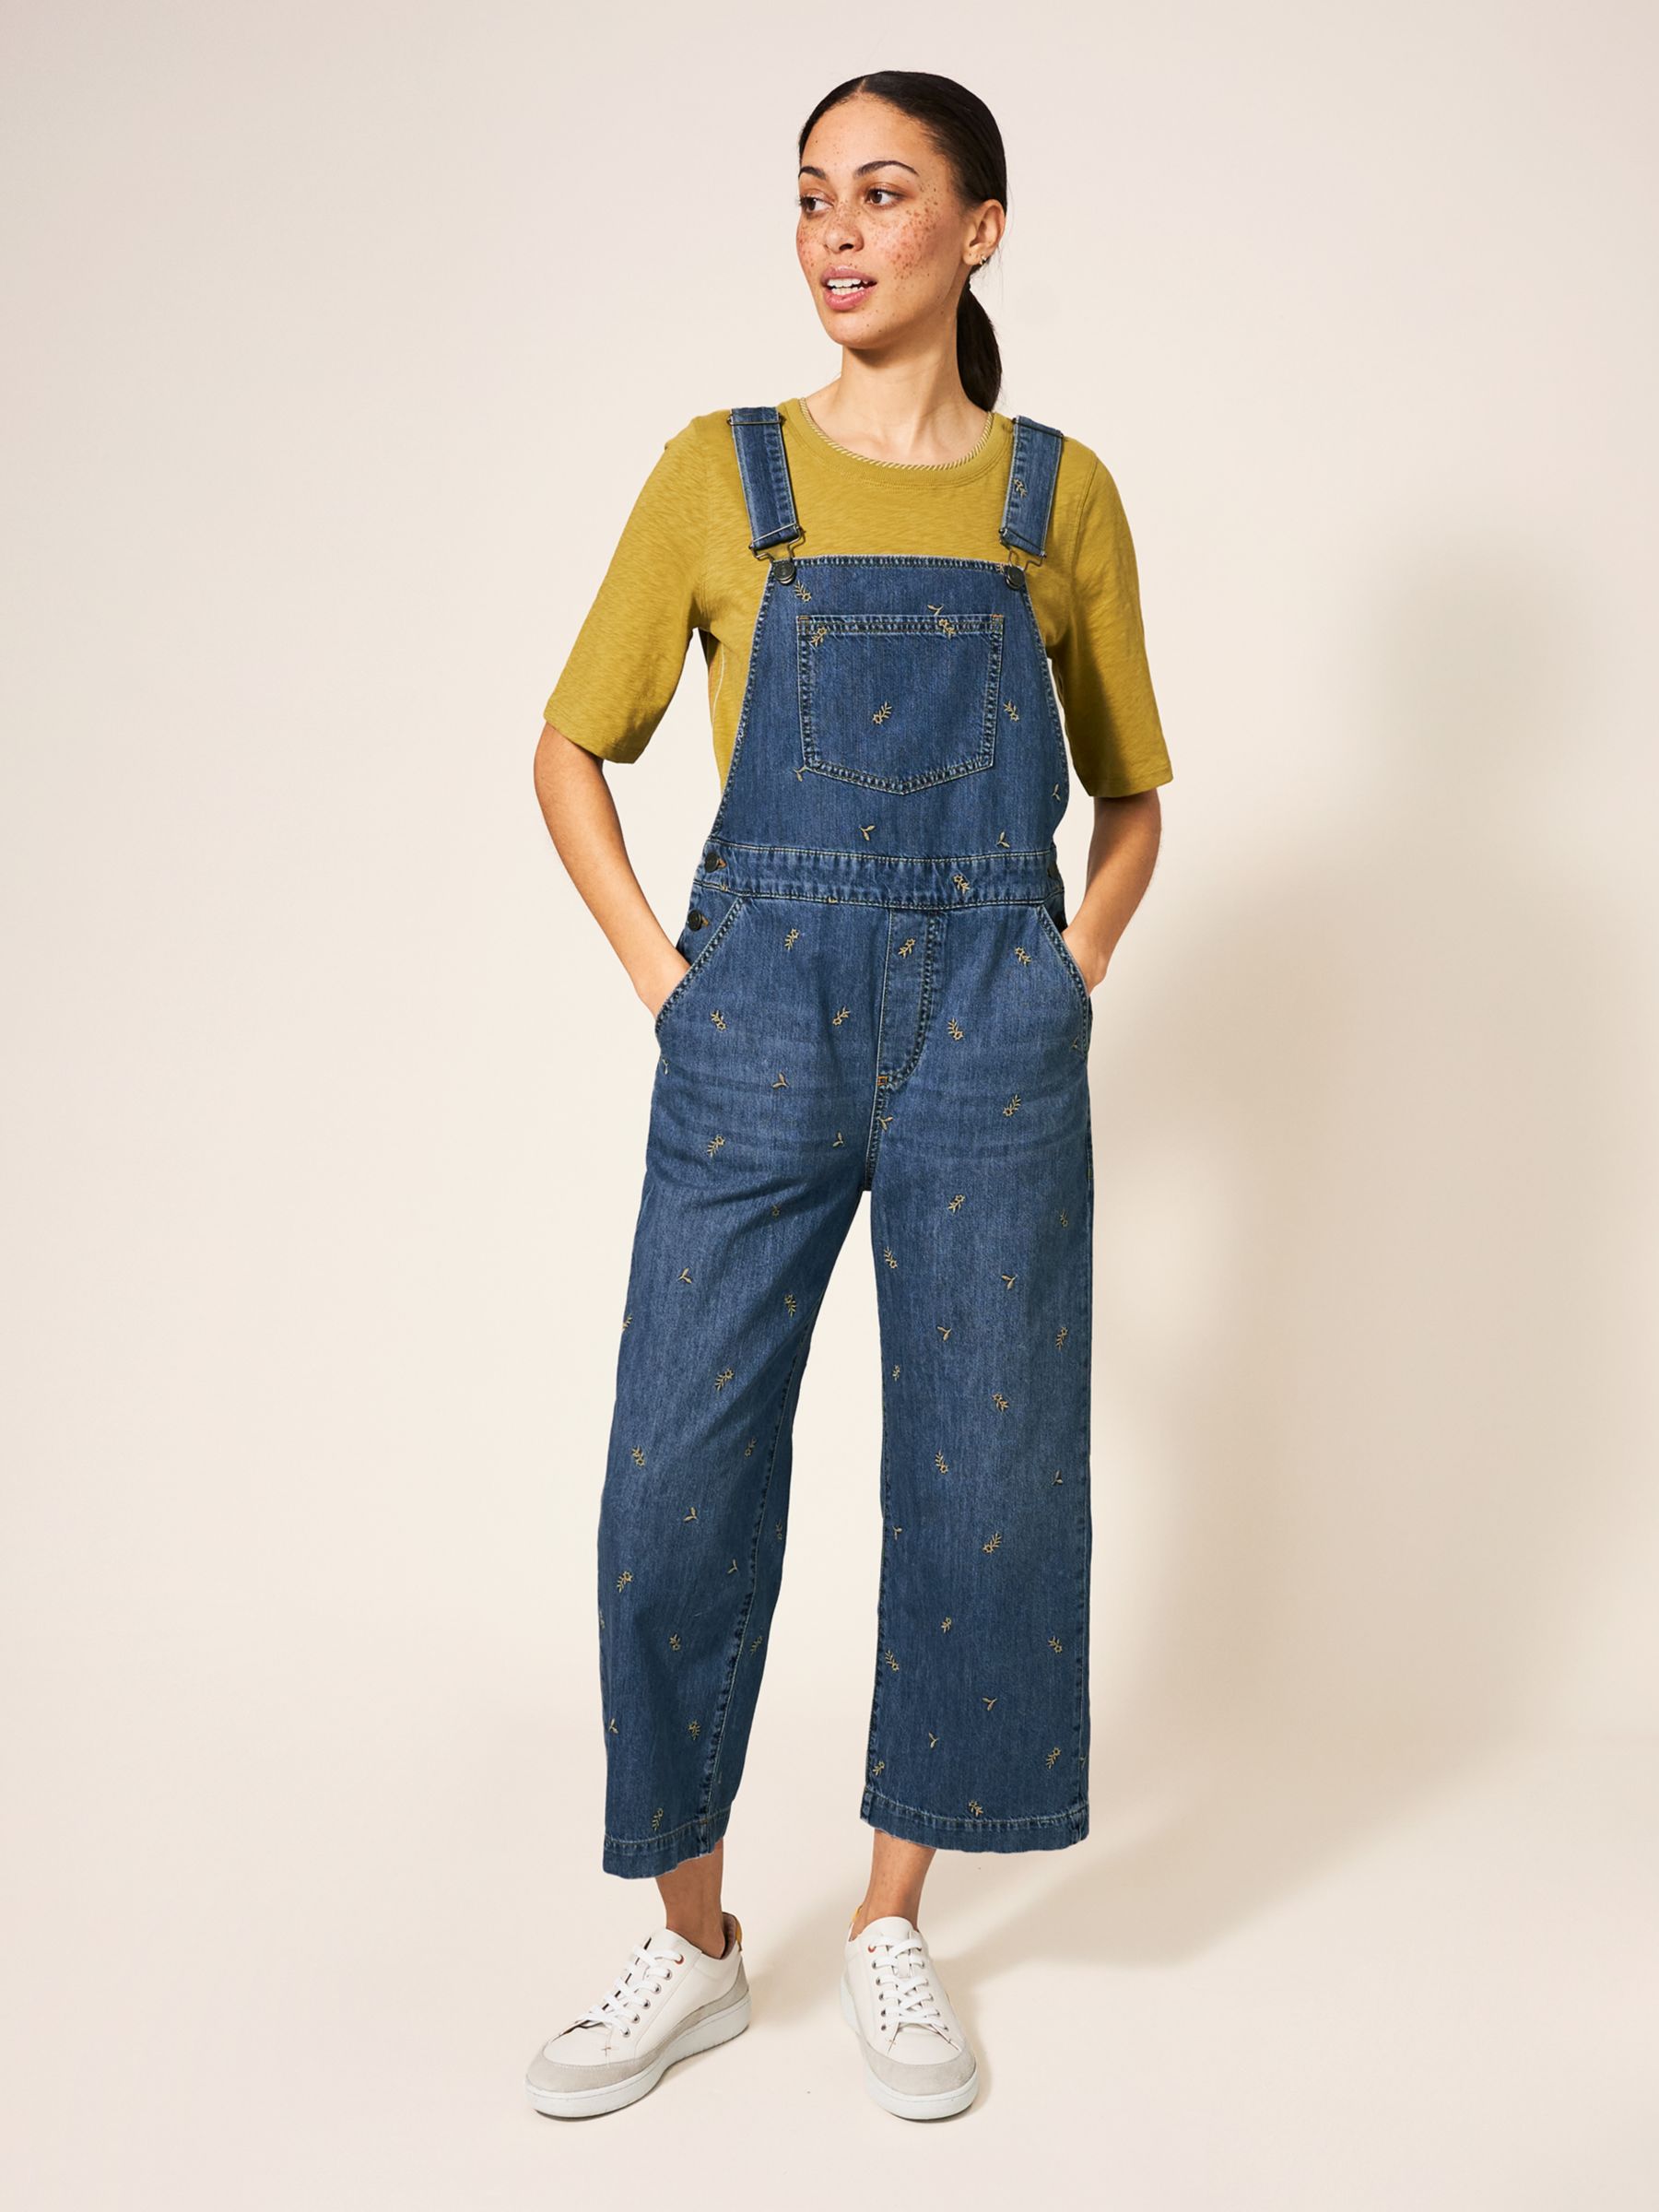 White Stuff Embroidered Cropped Dungarees, Blue, 6